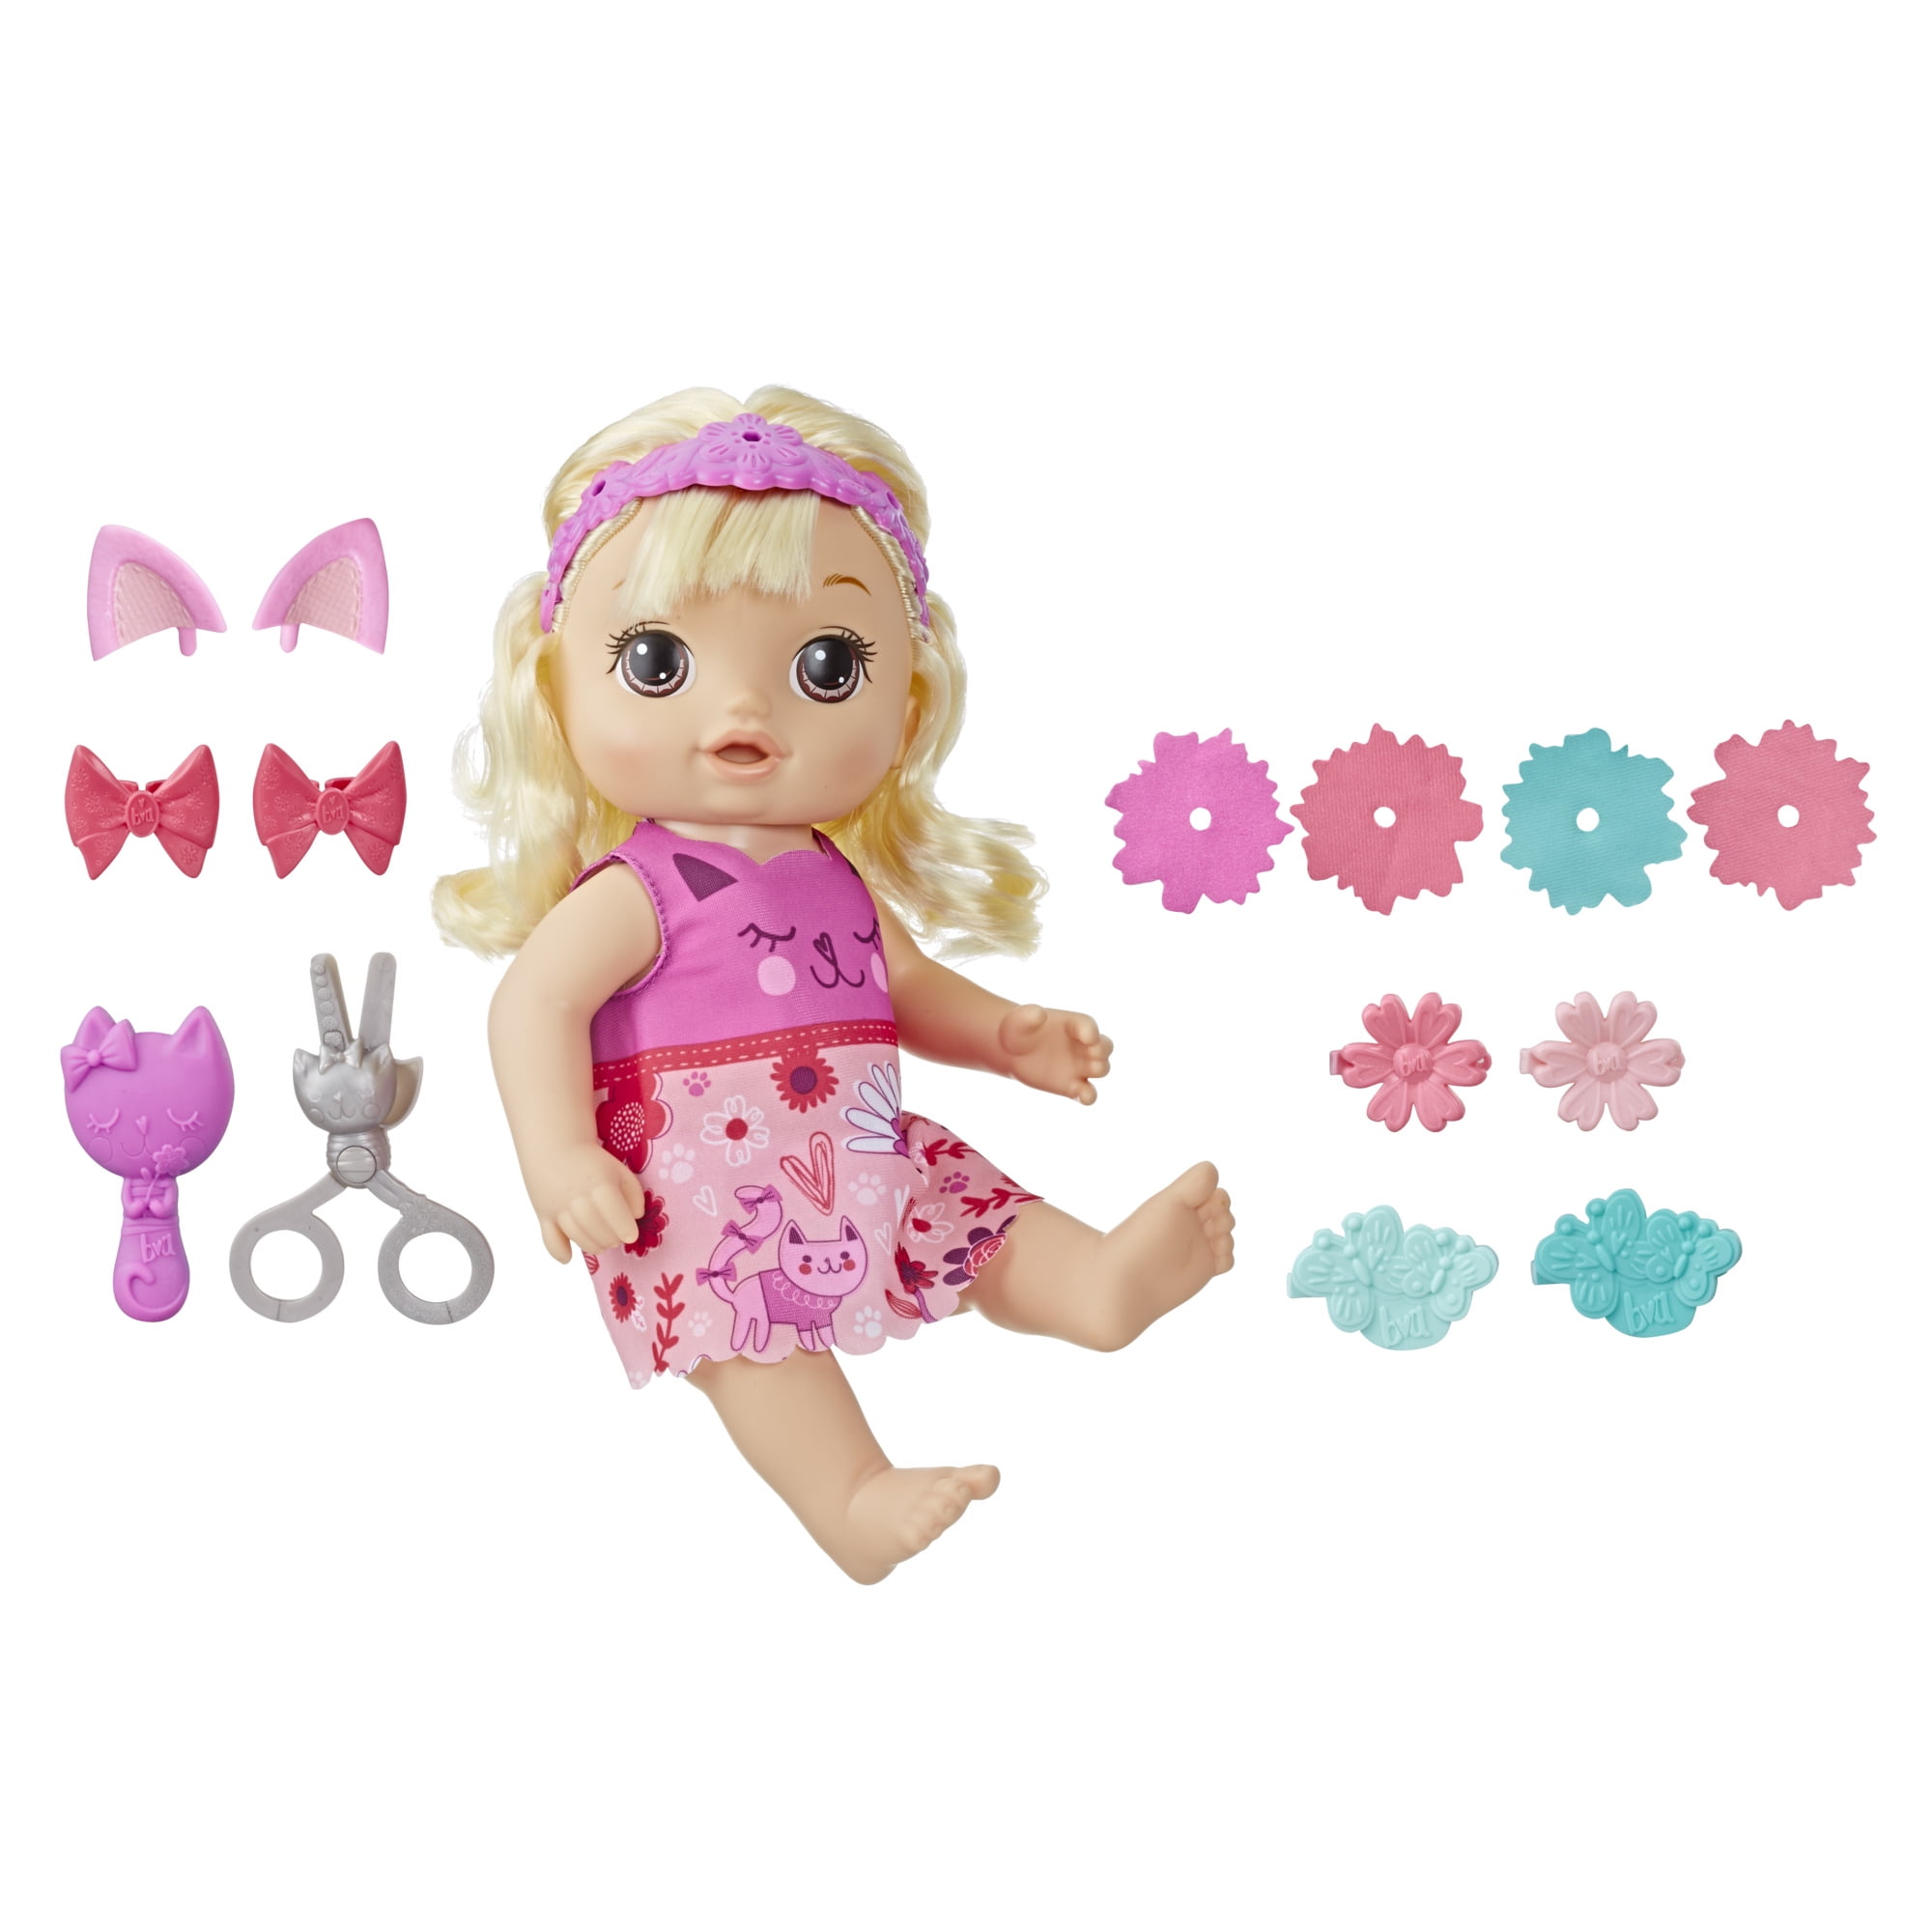 Baby Alive Snip 'N Style Baby Blonde Hair Talking Doll with Bangs that Grow